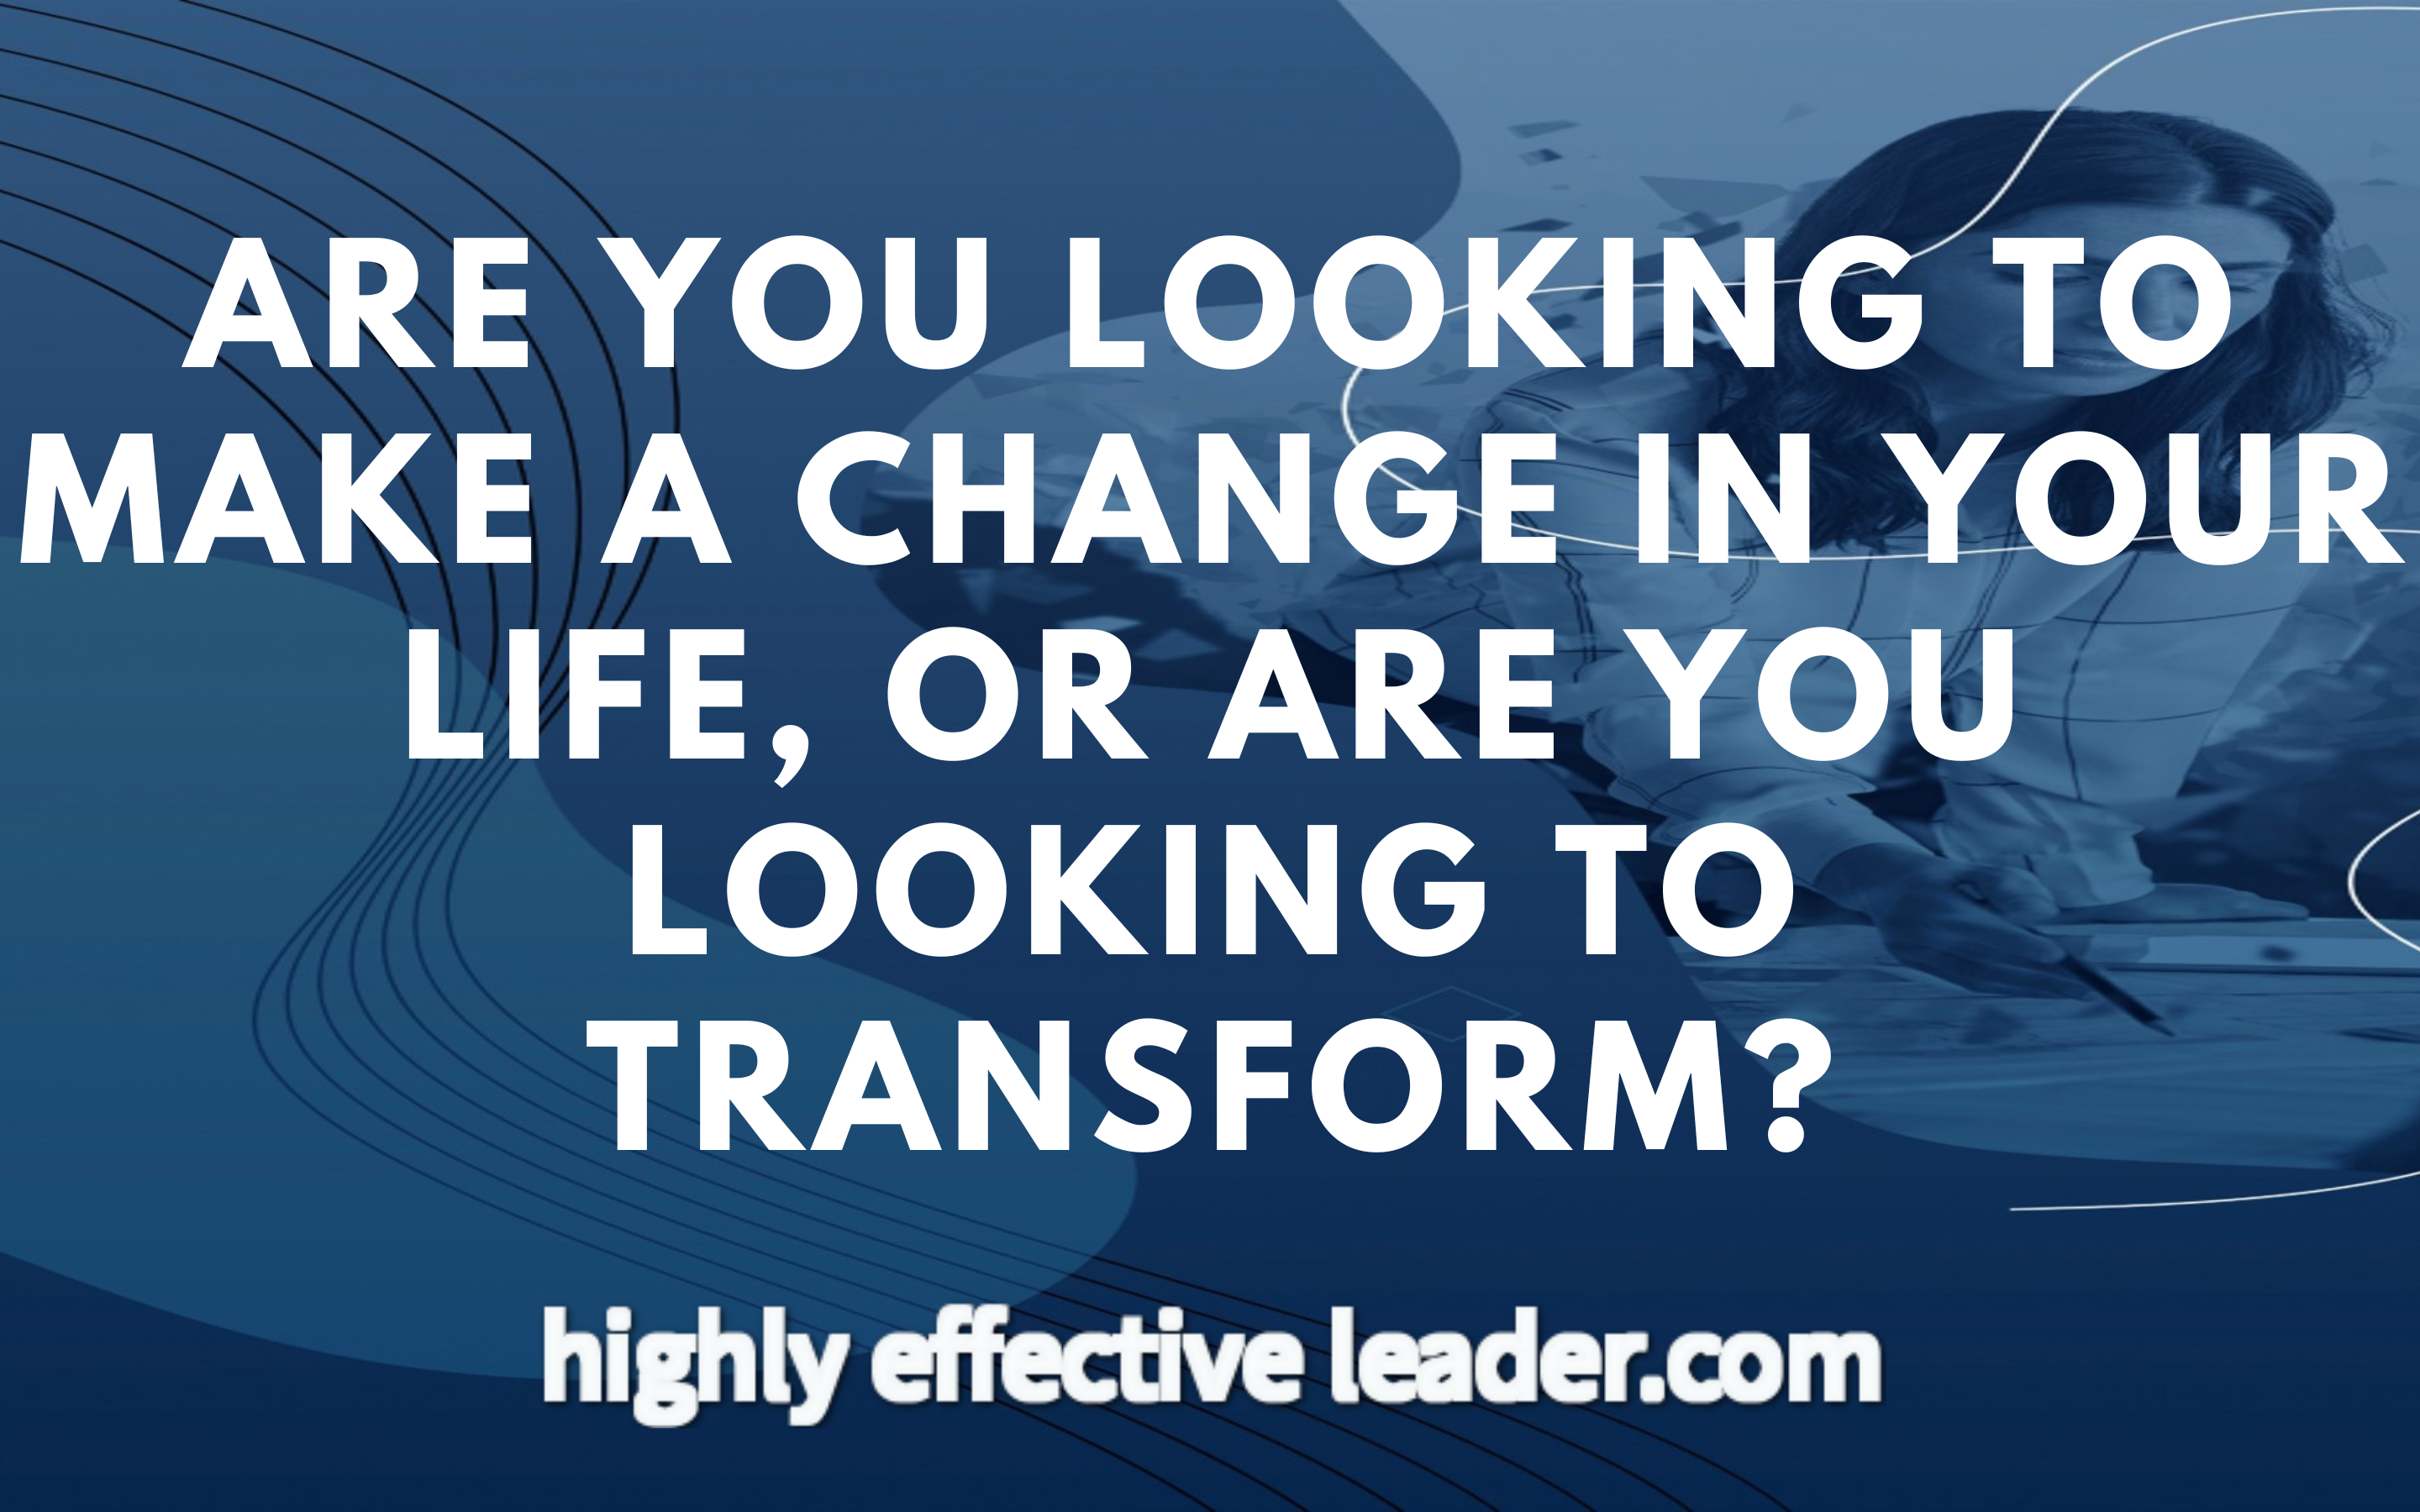 How Will You Transform Your Life?